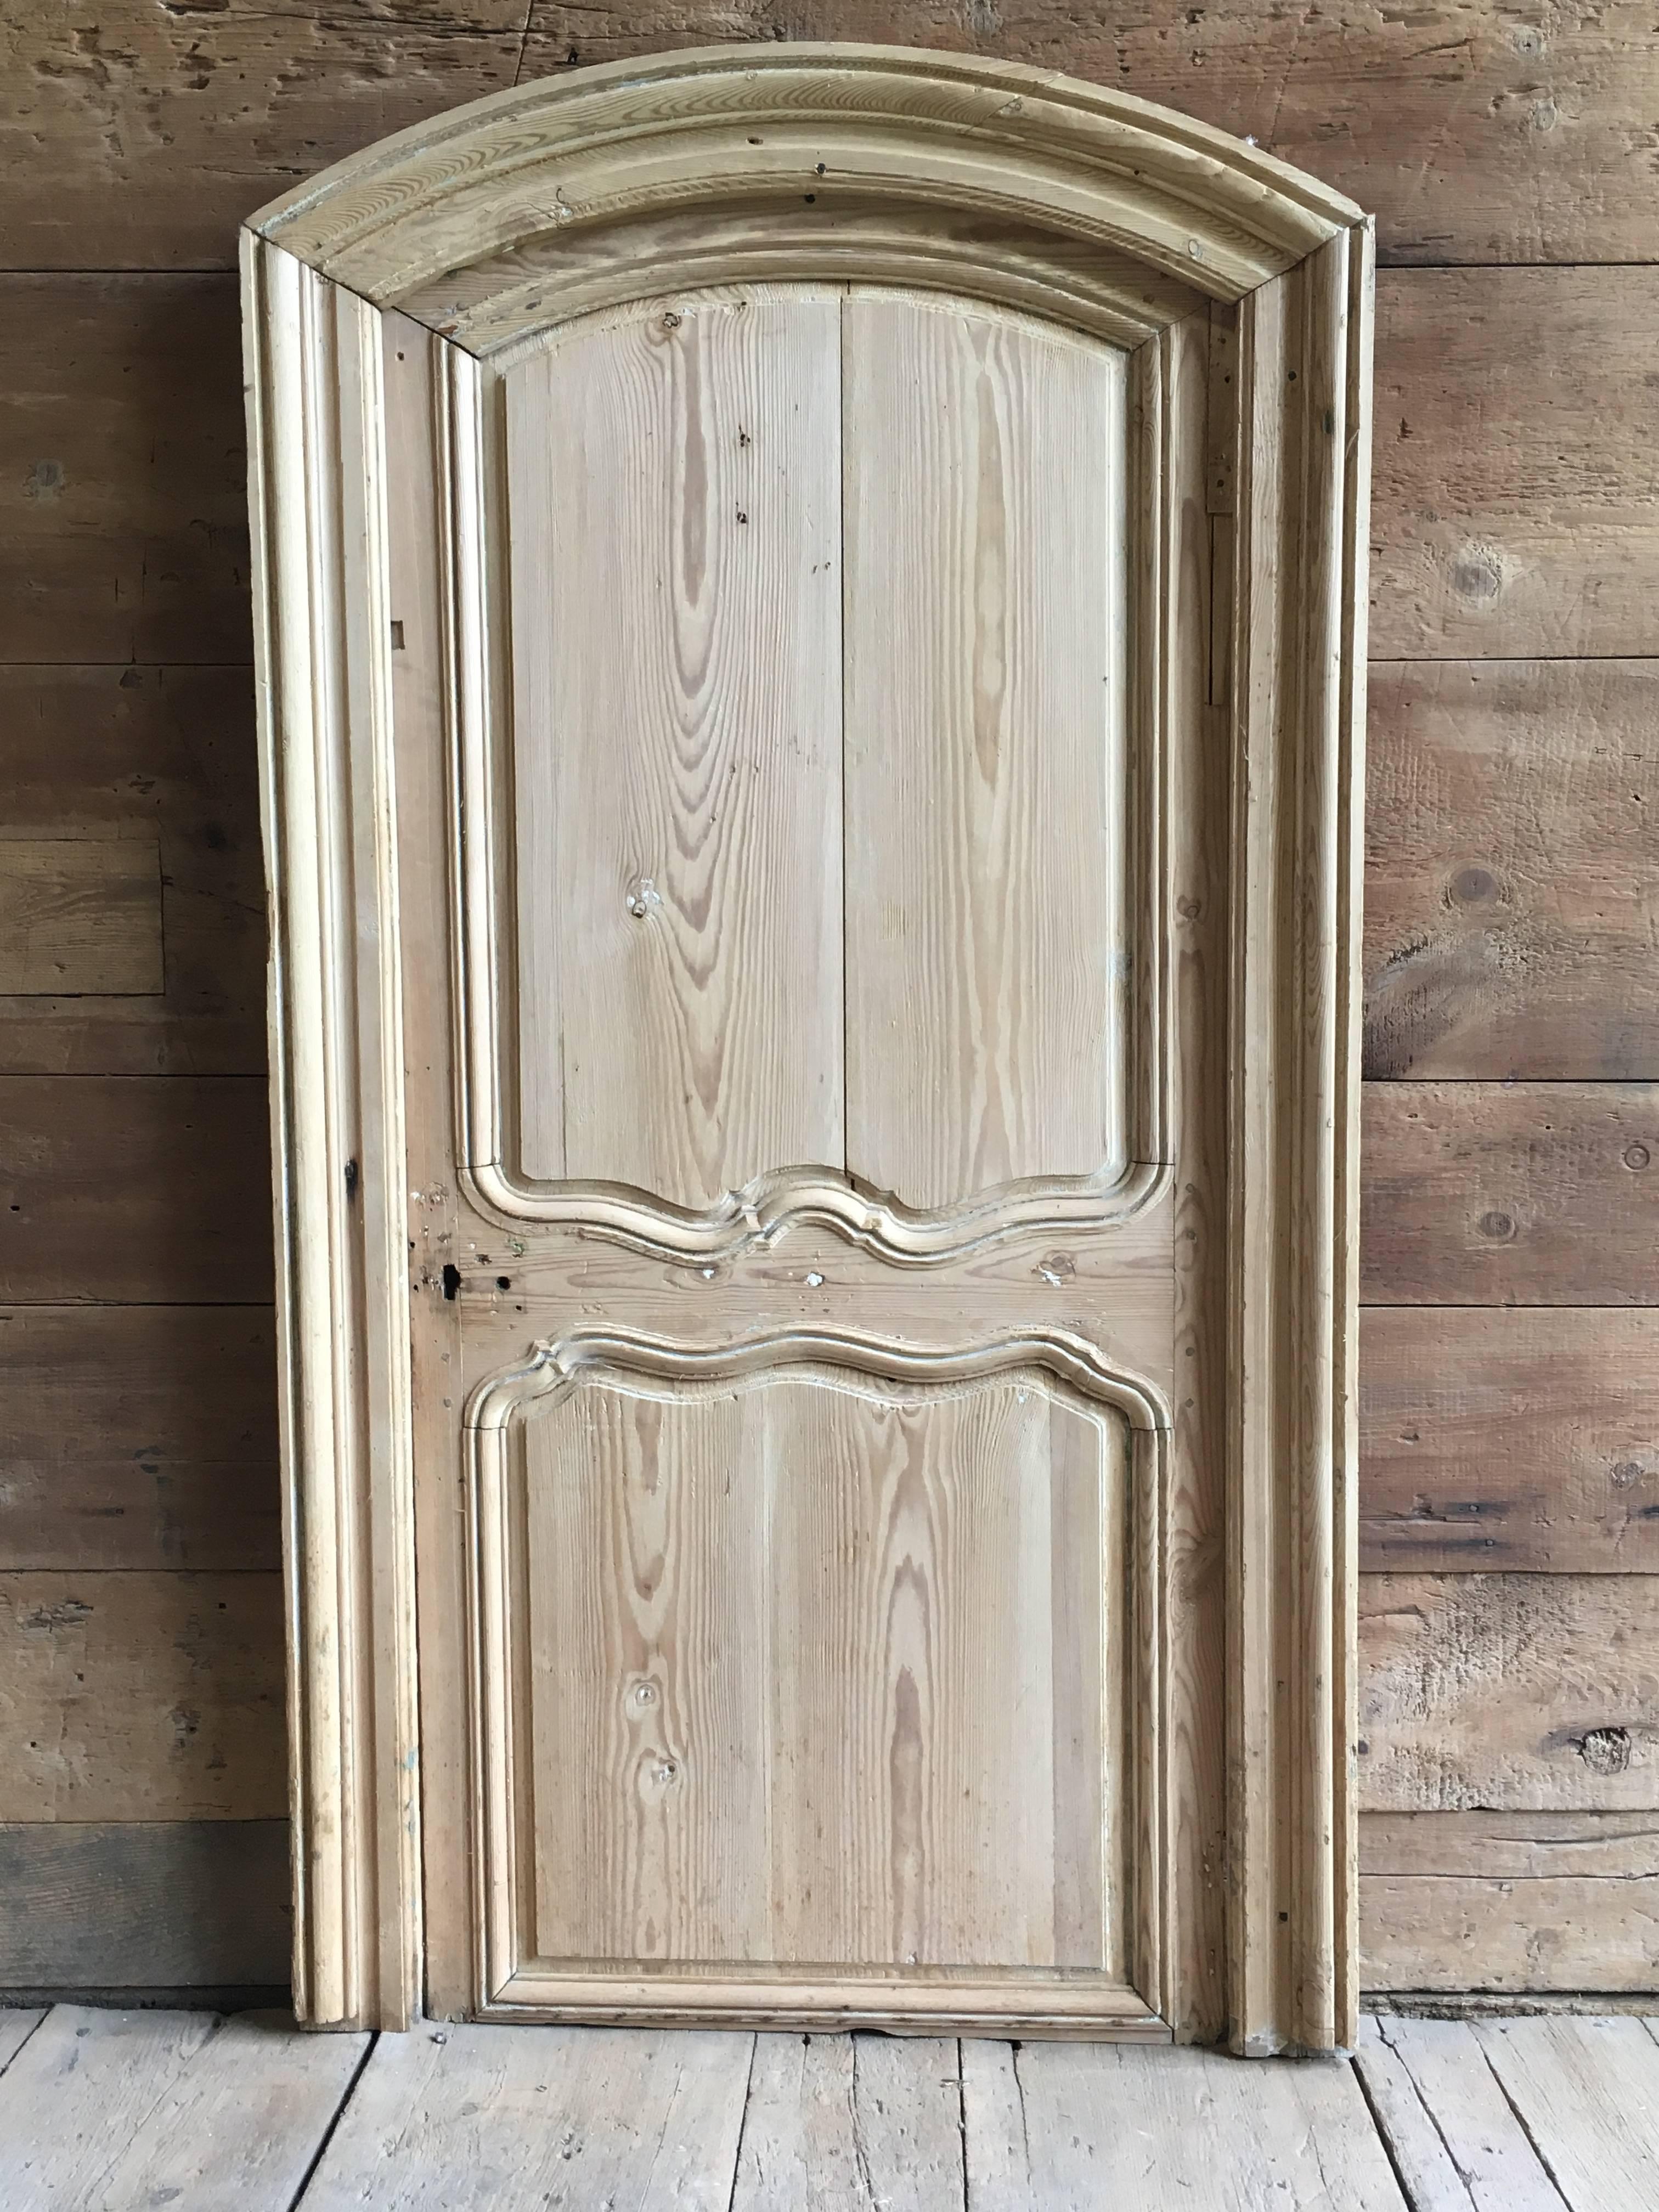 A Louis XV interior door in frame with over-door panel, in stripped and bleached pine, circa 1760, from the Normandy Region. The door retains its period surface mount lock (lacking knobs). Can be used with or without upper panel.

Height without